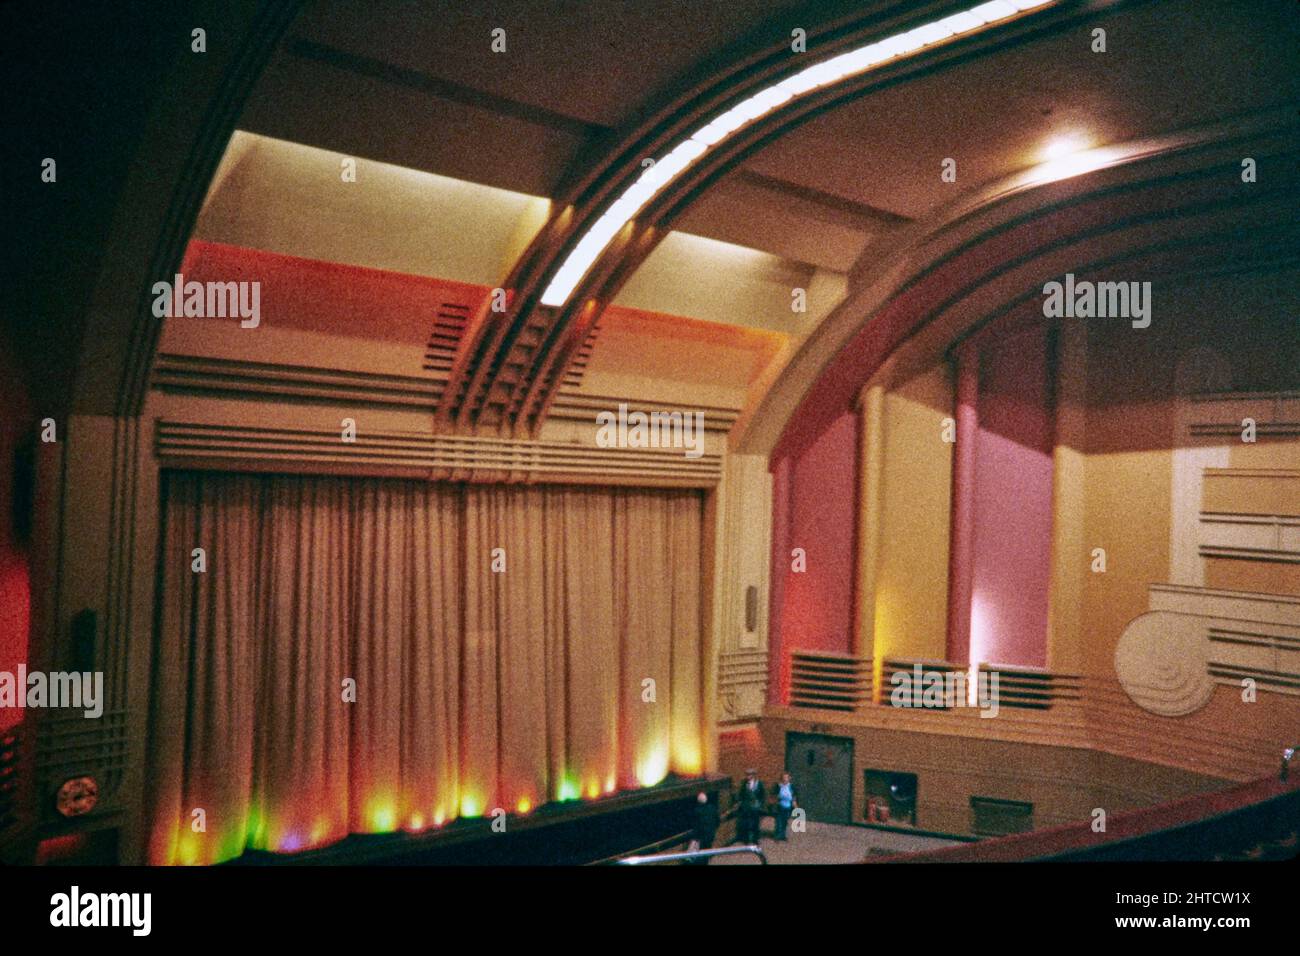 Odeon Cinema, Fortis Green Road, Muswell Hill, Haringey, London, 1974-1999. The auditorium in the Odeon Cinema, viewed from the side of the circle, showing the curtained screen, proscenium and curved front and ceiling. The Odeon Cinema opened in 1936. The exterior design of the building was restricted and subdued due to opposition from the church located opposite; the interior was therefore designed to compensate. The auditorium is described as being &quot;the most elaborate interior of any Odeon cinema to survive&quot;. It was divided into three screens in 1974, with two screens in beneath th Stock Photo